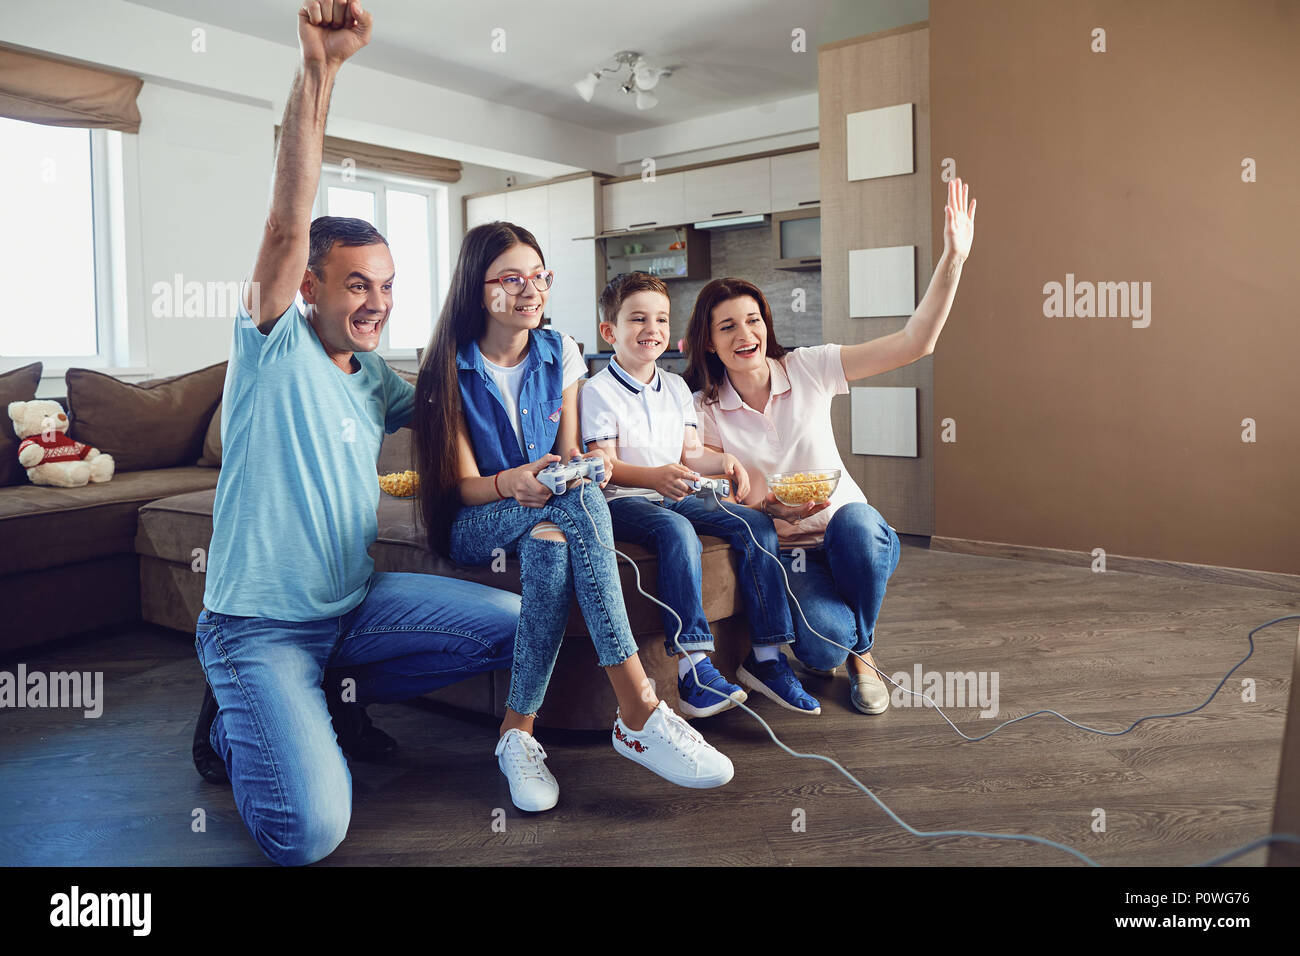 A cheerful family is playing video games while sitting on a sofa in the house. Stock Photo